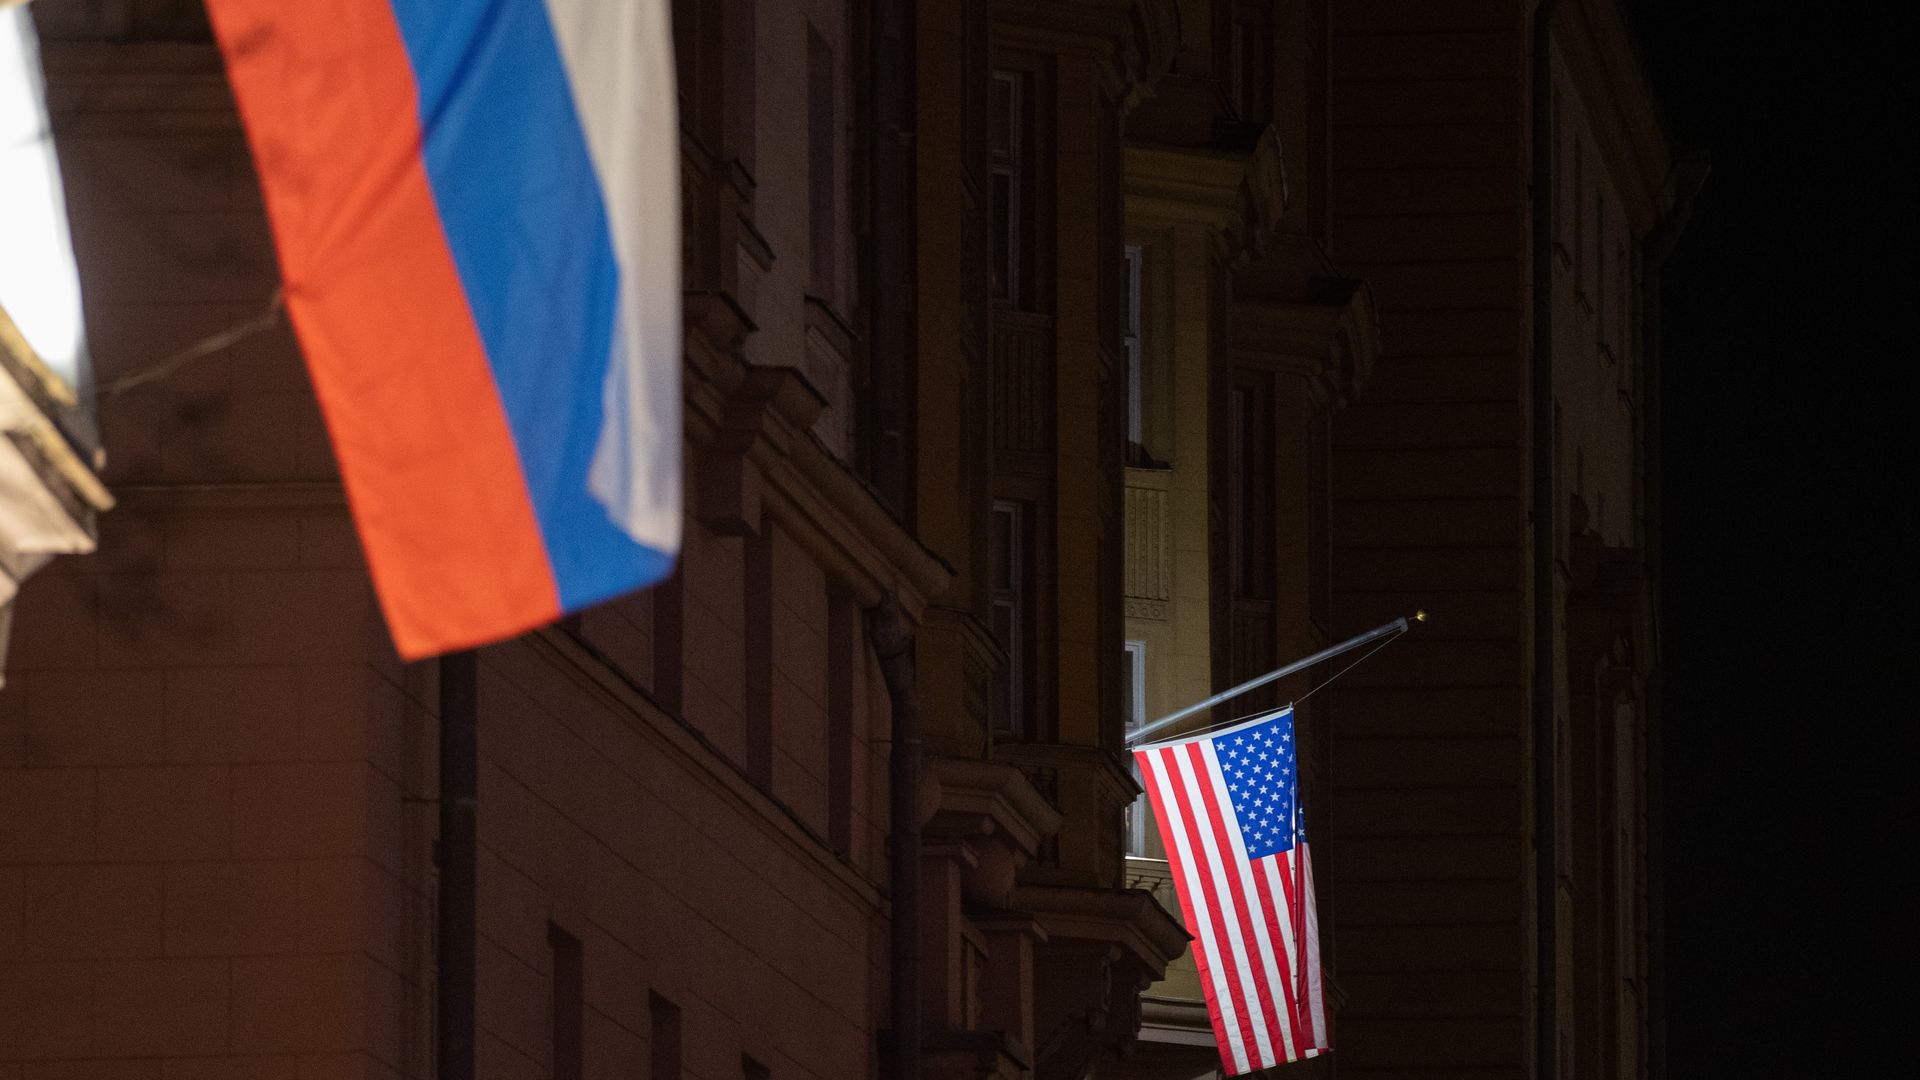 Photo taken on March 24, 2022 shows the U.S. national flag R on the U.S. Embassy building in Moscow, Russia